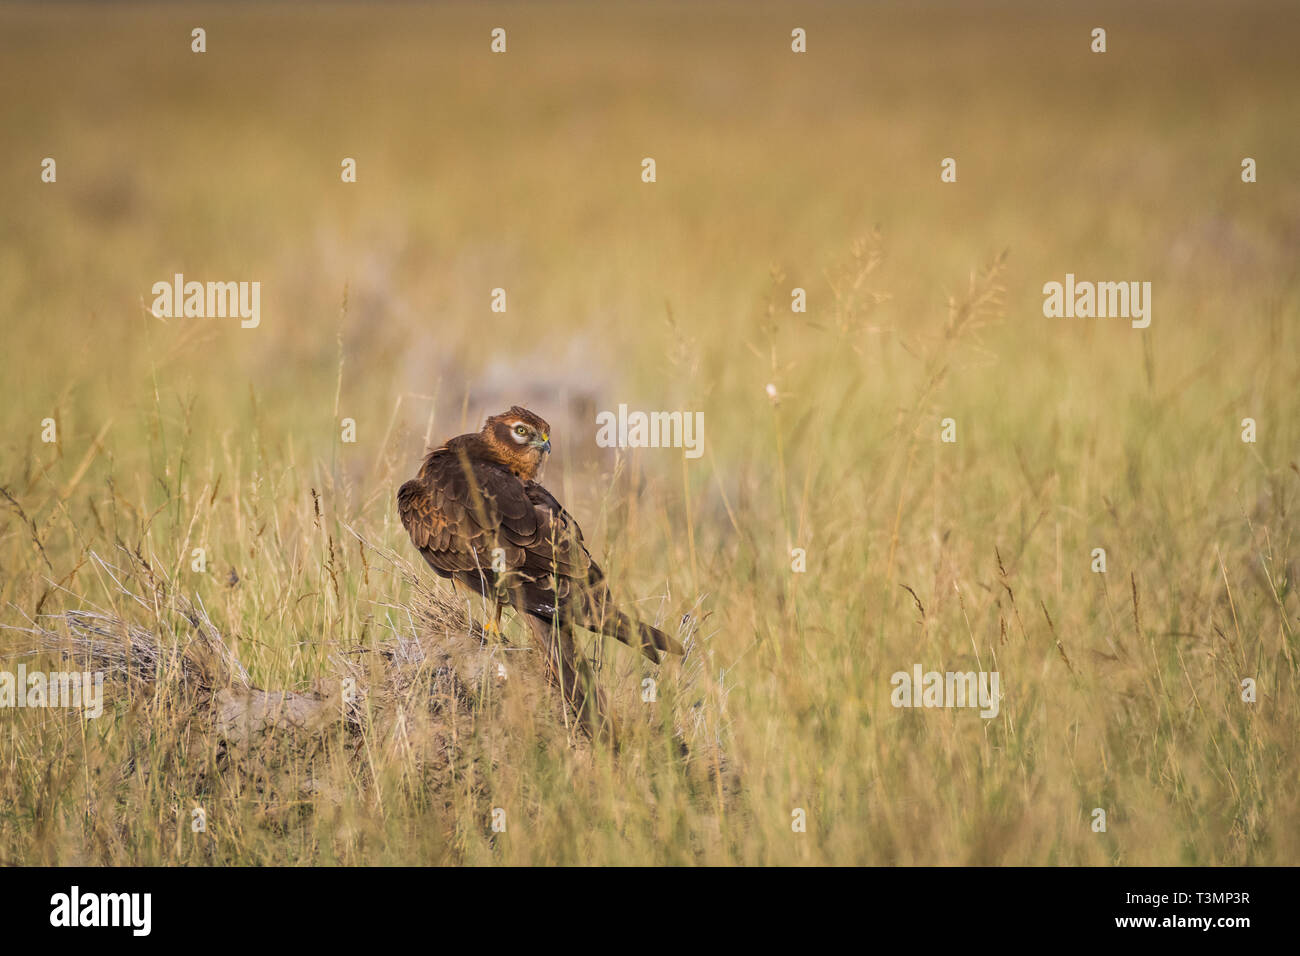 A habitat image of Montagu's harrier or Circus pygargus sitting on a beautiful perch in meadows at tal chappar blackbuck sanctuary, India Stock Photo